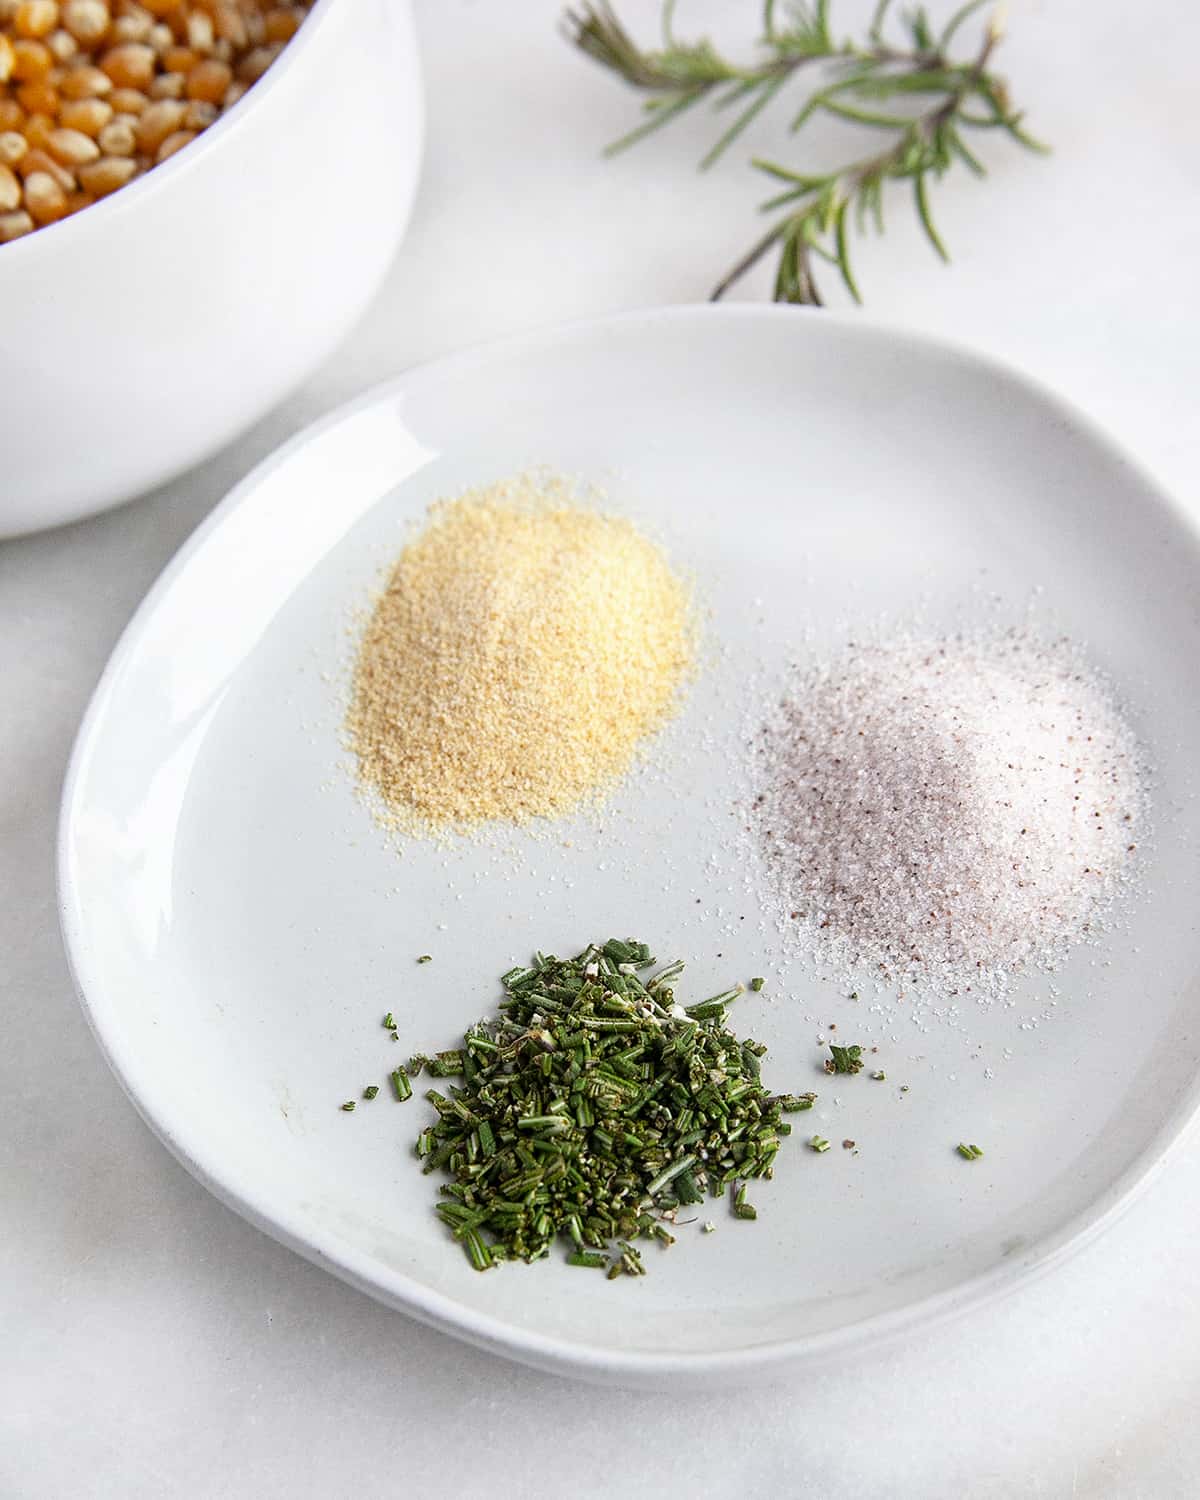 Garlic, salt and rosemary seasonings for the popcorn in small piles on a plate. 